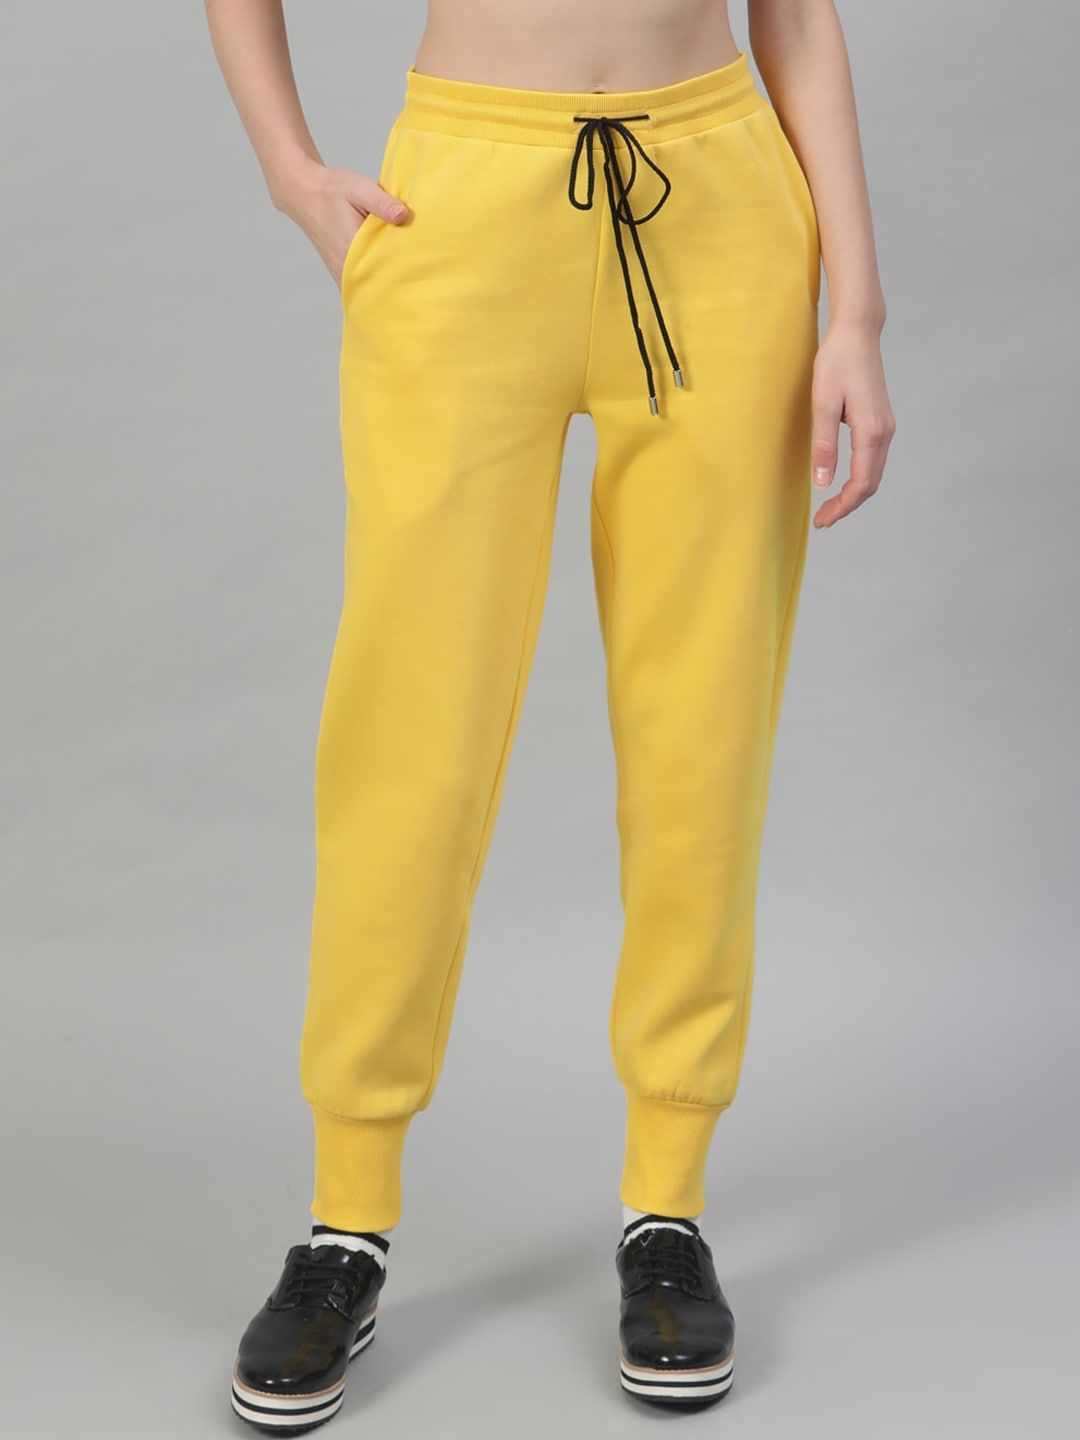 STREET 9 Women Yellow Regular Fit Solid Joggers Price in India